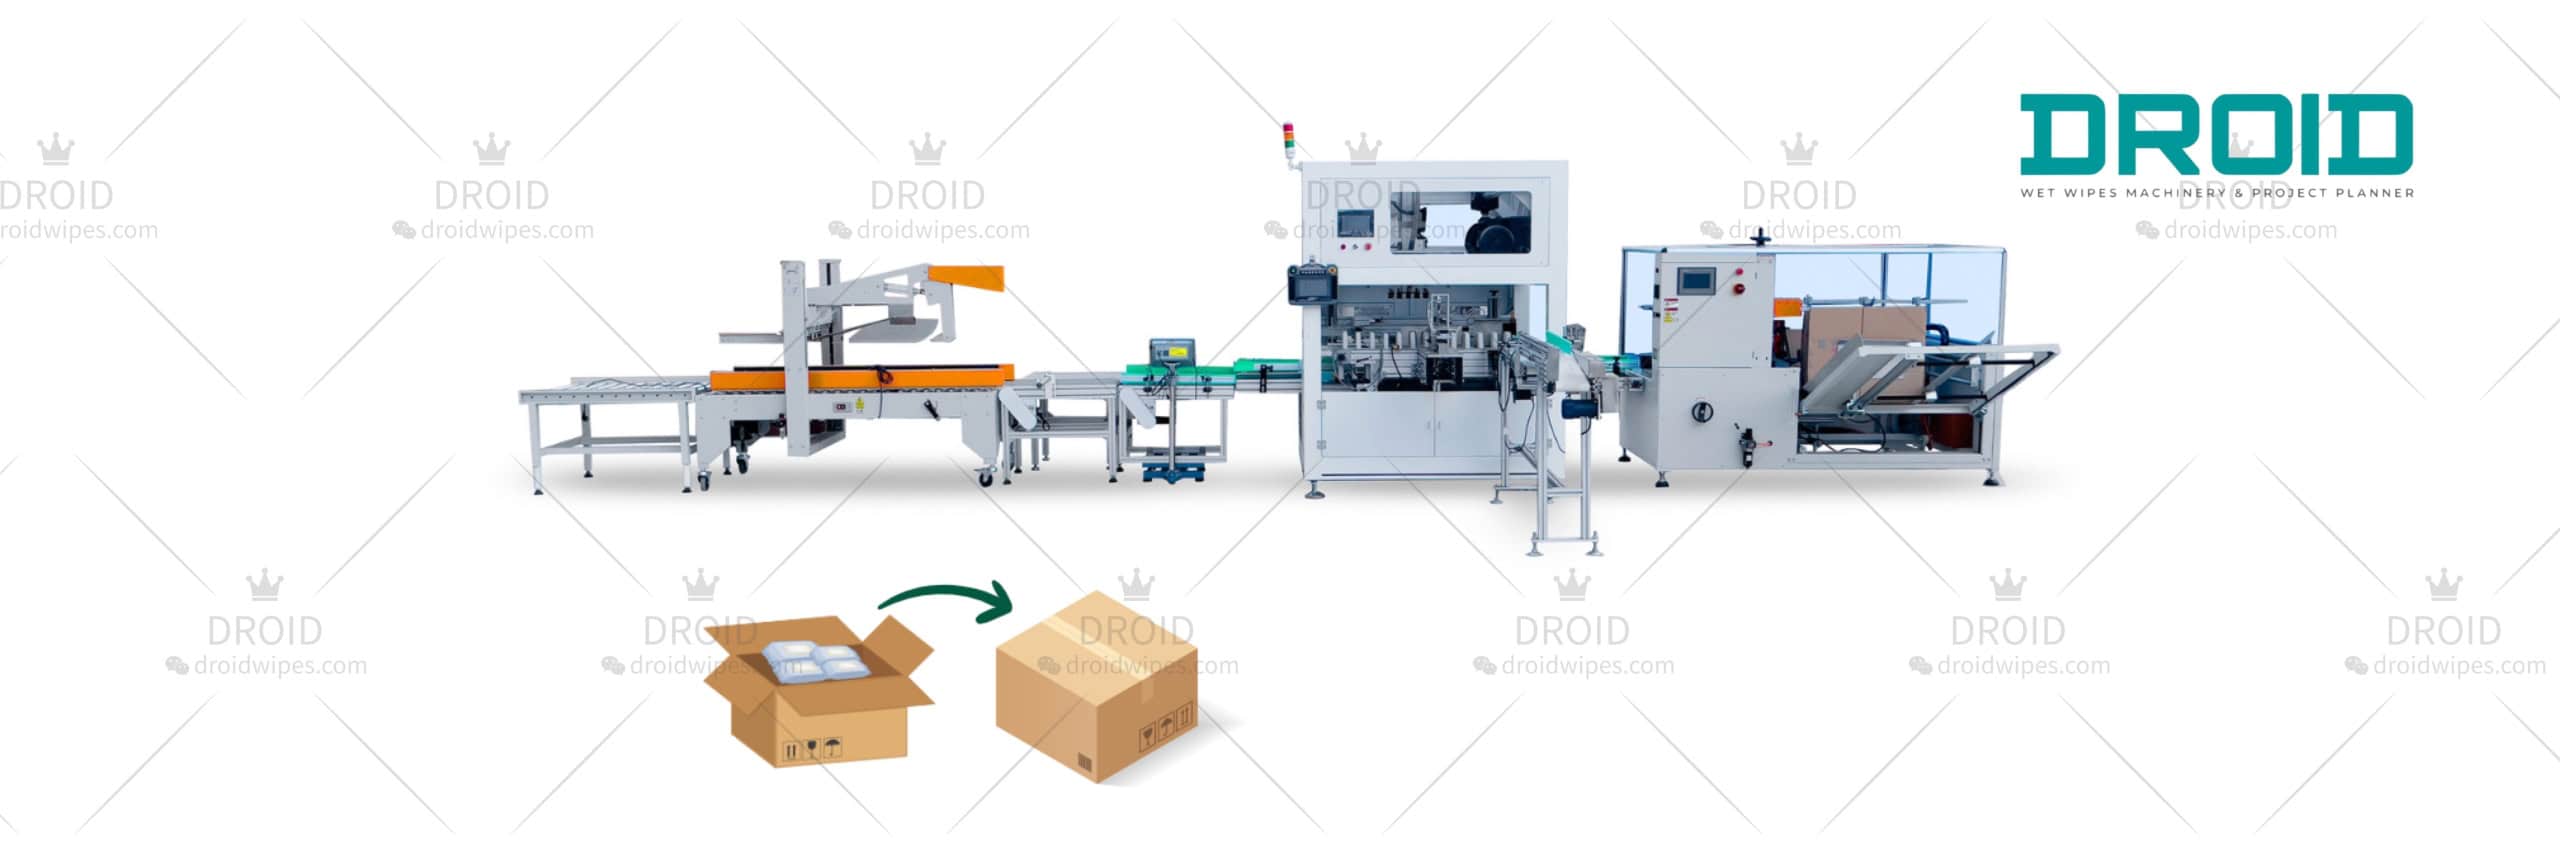 UT C300 Robotic Case Packer for Wet Wipes Production DROID  scaled - UT-FL2 Cross fold Wet Wipes Machine (5-40Wipes/pack)